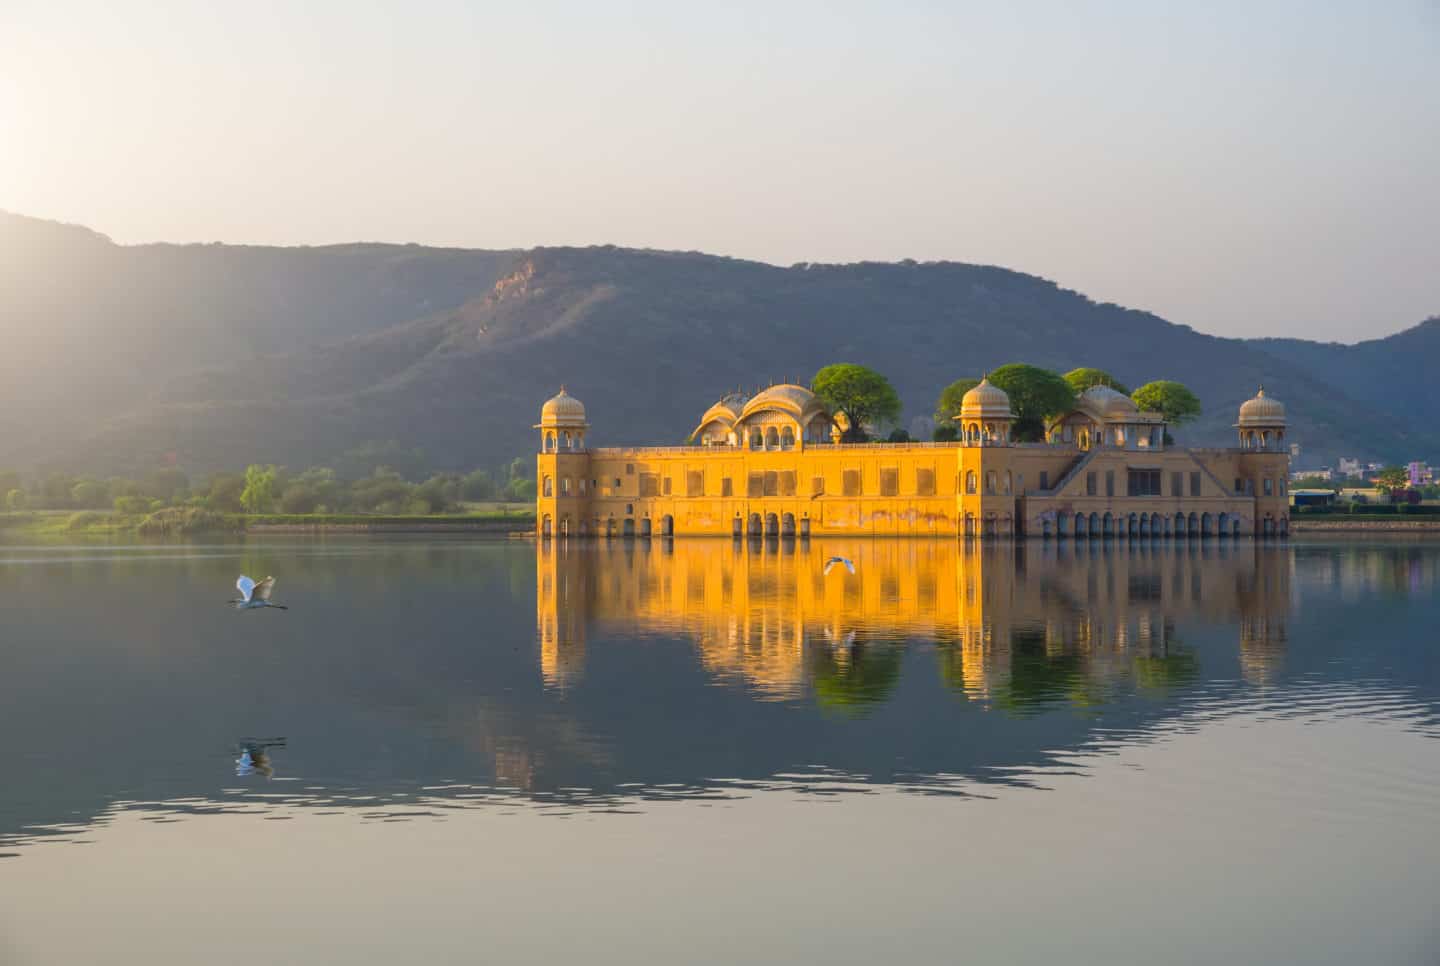 Places to visit in Jaipur | The Palace Jal Mahal (Water Palace) in the middle of Man Sager Lake at sunrise, Jaipur, Rajasthan, India, Asia